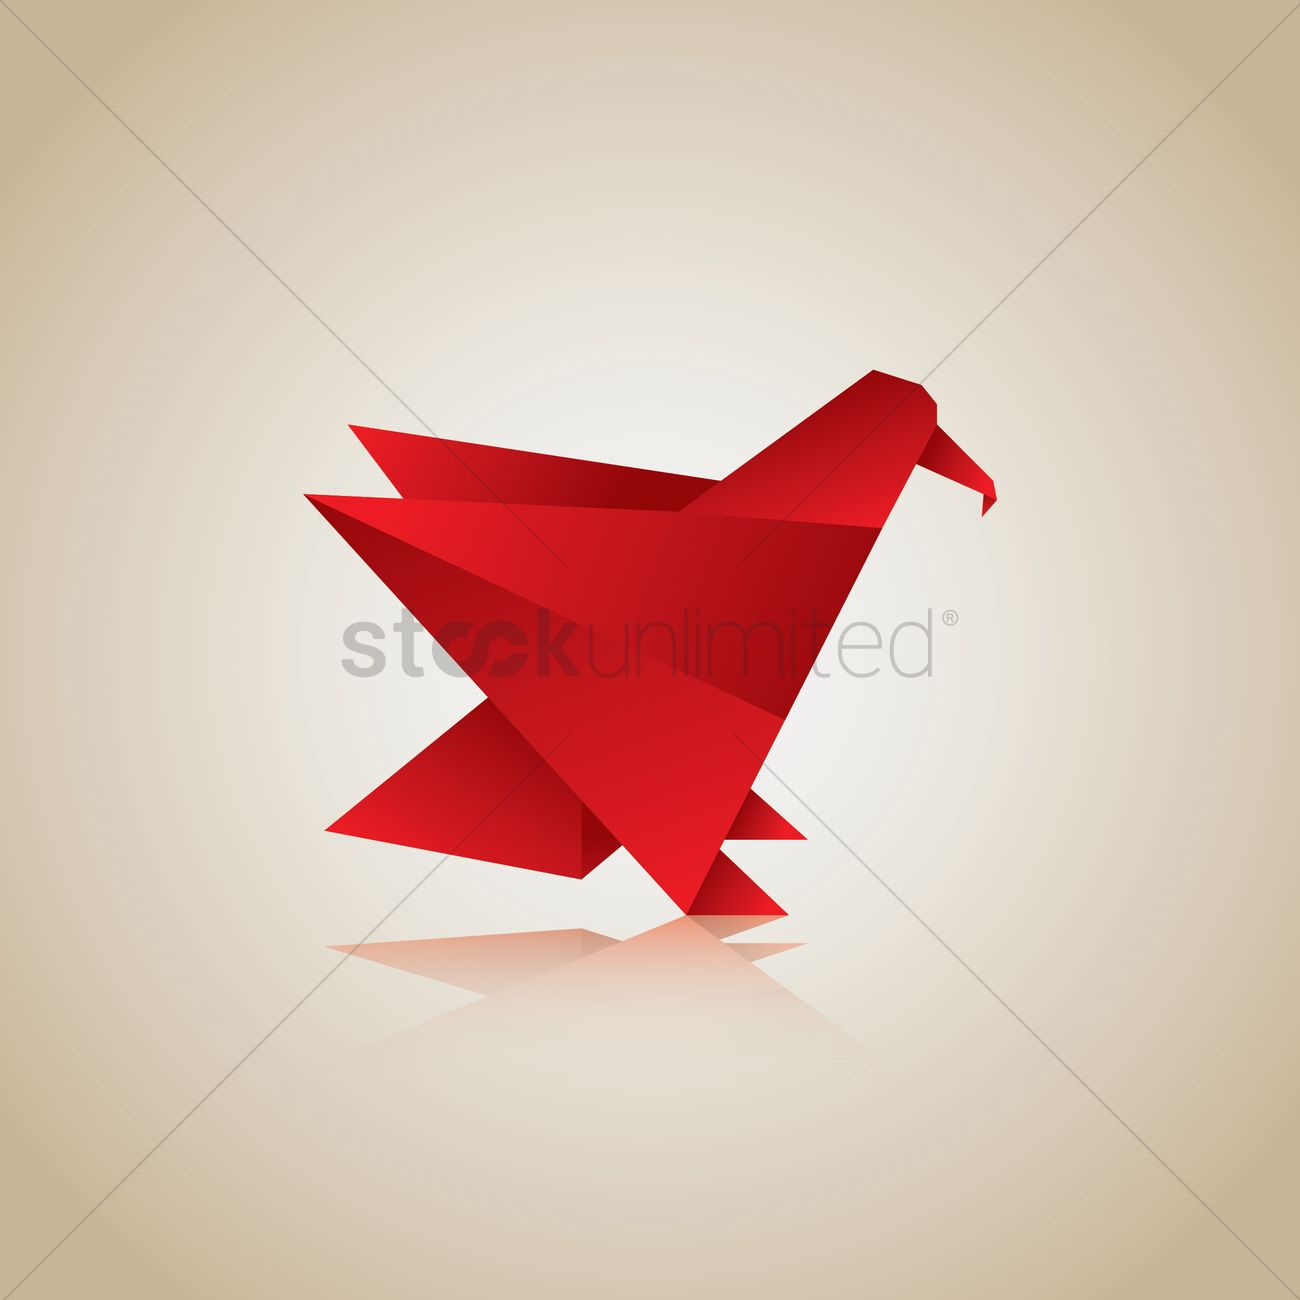 How To Make An Origami Eagle Free Origami Eagle Vector Image 1482076 Stockunlimited